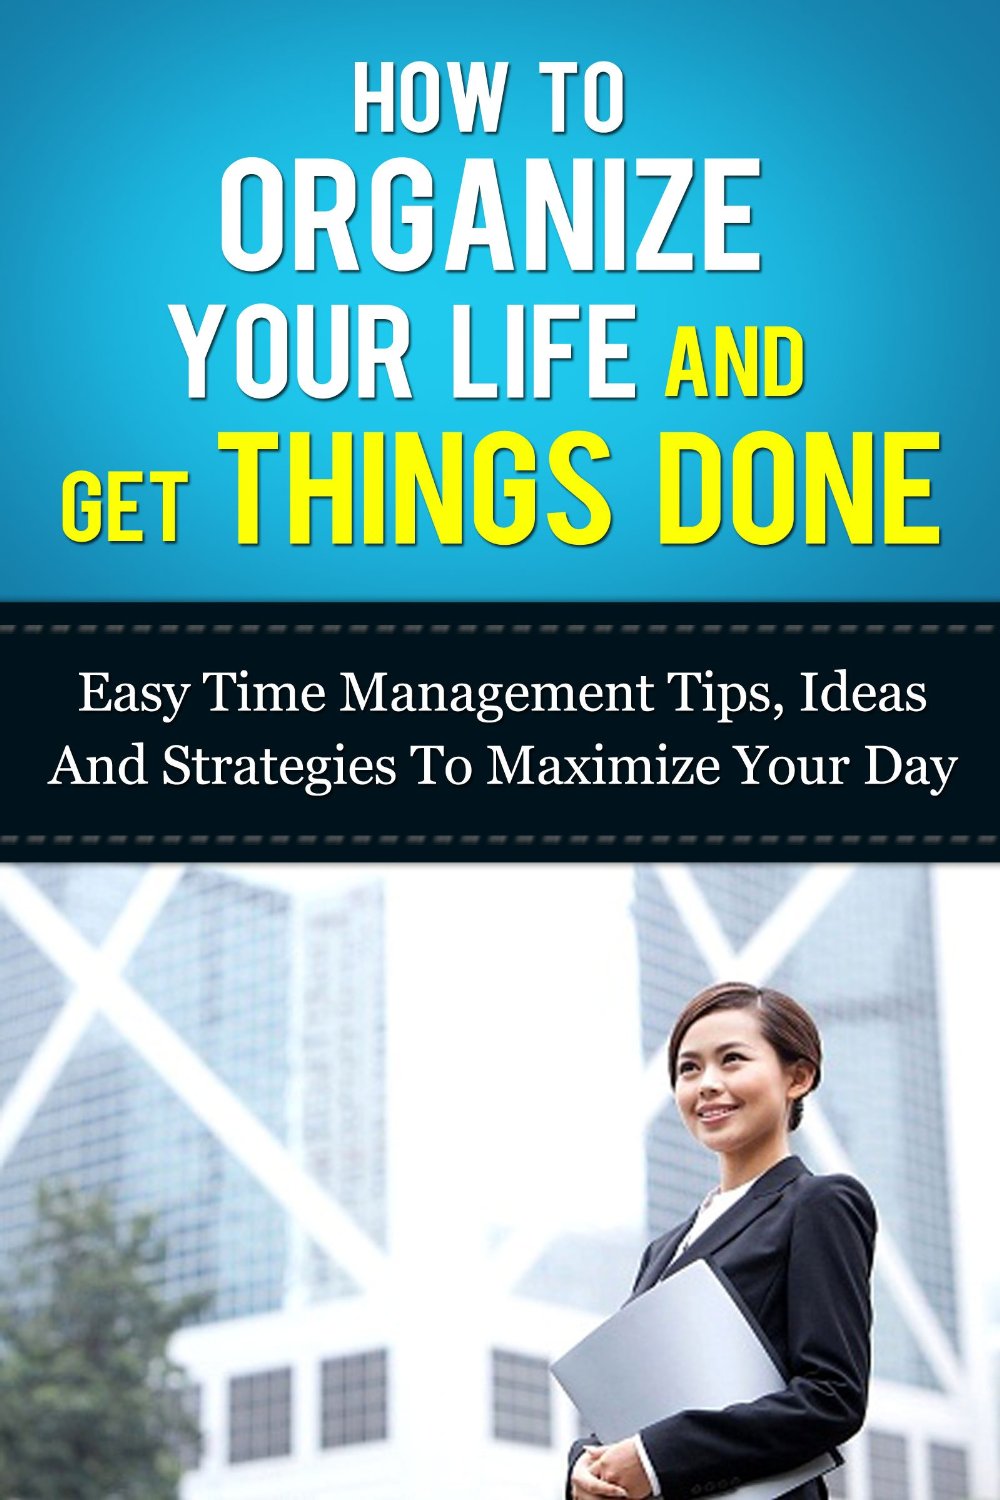 How to Organize Your Life And Get Things Done: Easy Time Management Tips, Ideas, And Strategies To Maximize Your Day (Time Management And Organization- How To Manage Your Daily Routine Series) by Michael Manning